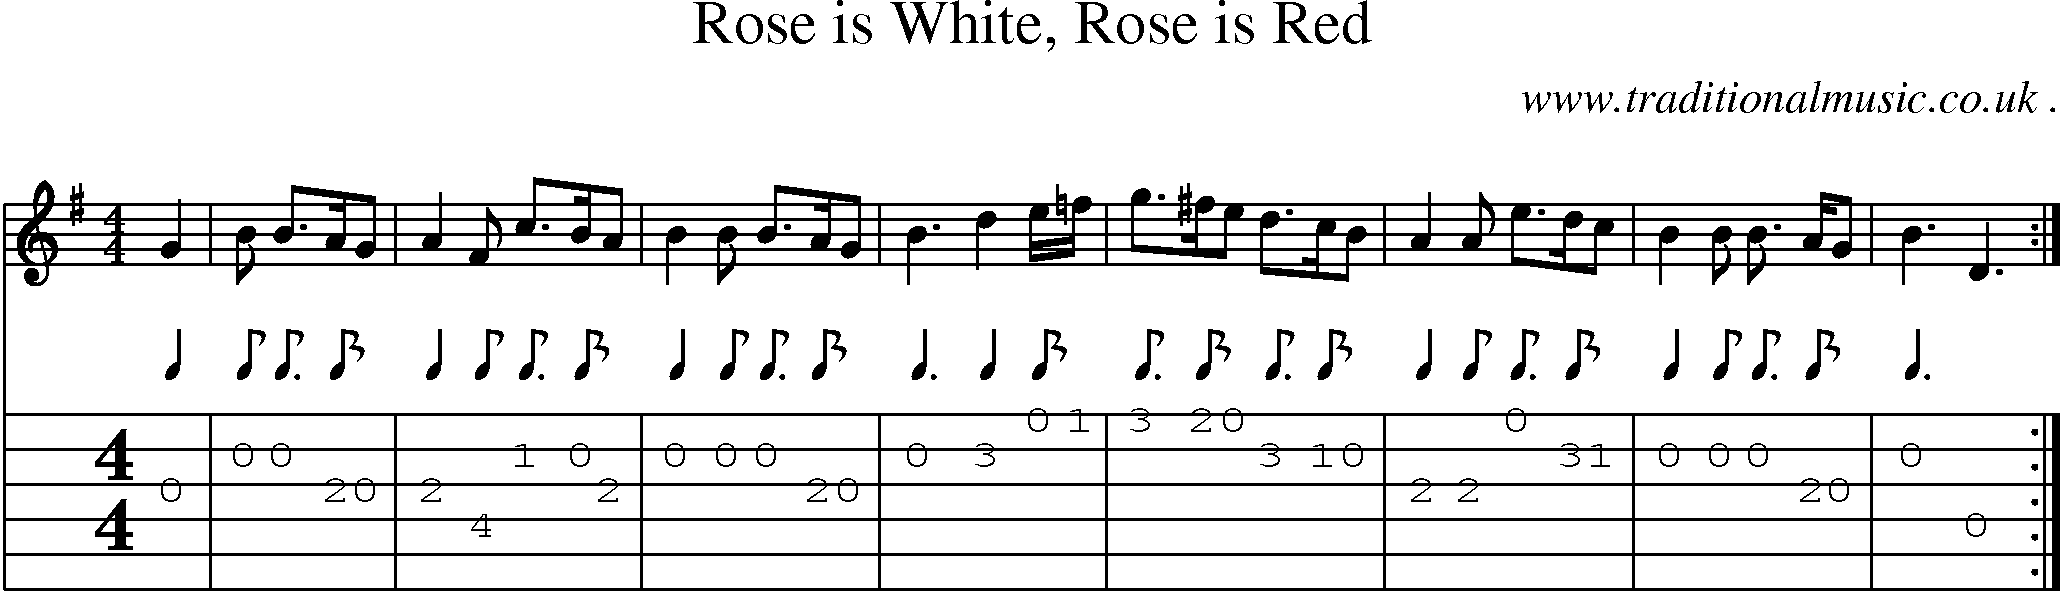 Sheet-Music and Guitar Tabs for Rose Is White Rose Is Red